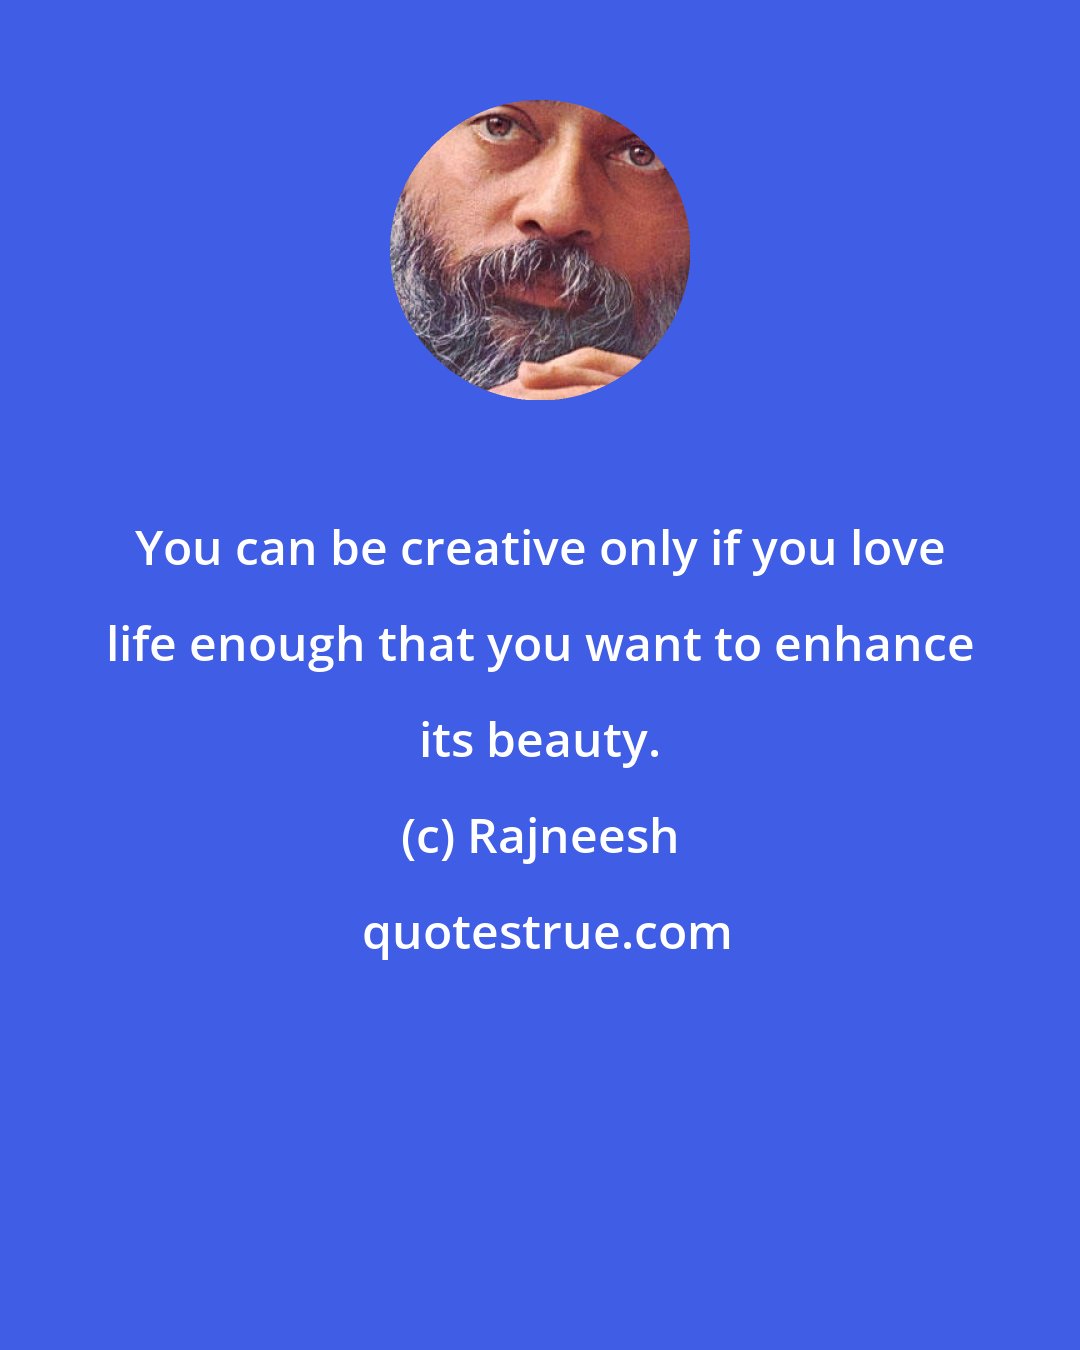 Rajneesh: You can be creative only if you love life enough that you want to enhance its beauty.